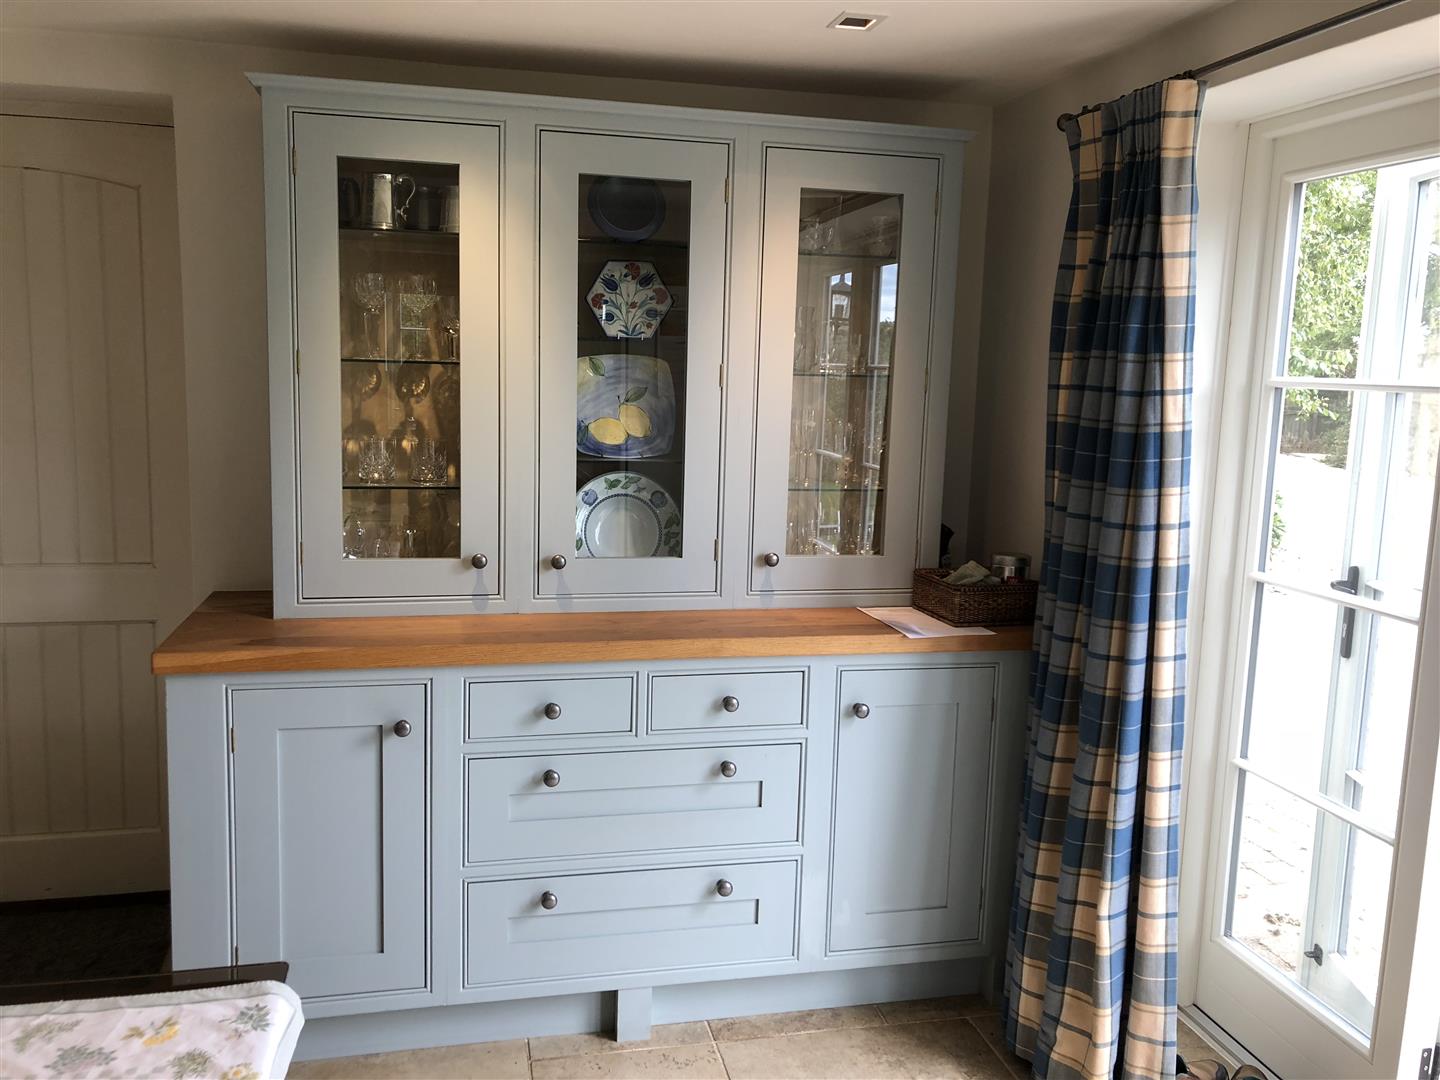 Redbrook kitchens design and install bespoke kitchens in Gloucestershire. Traditional proportions framing an attractive front framed Shaker dresser